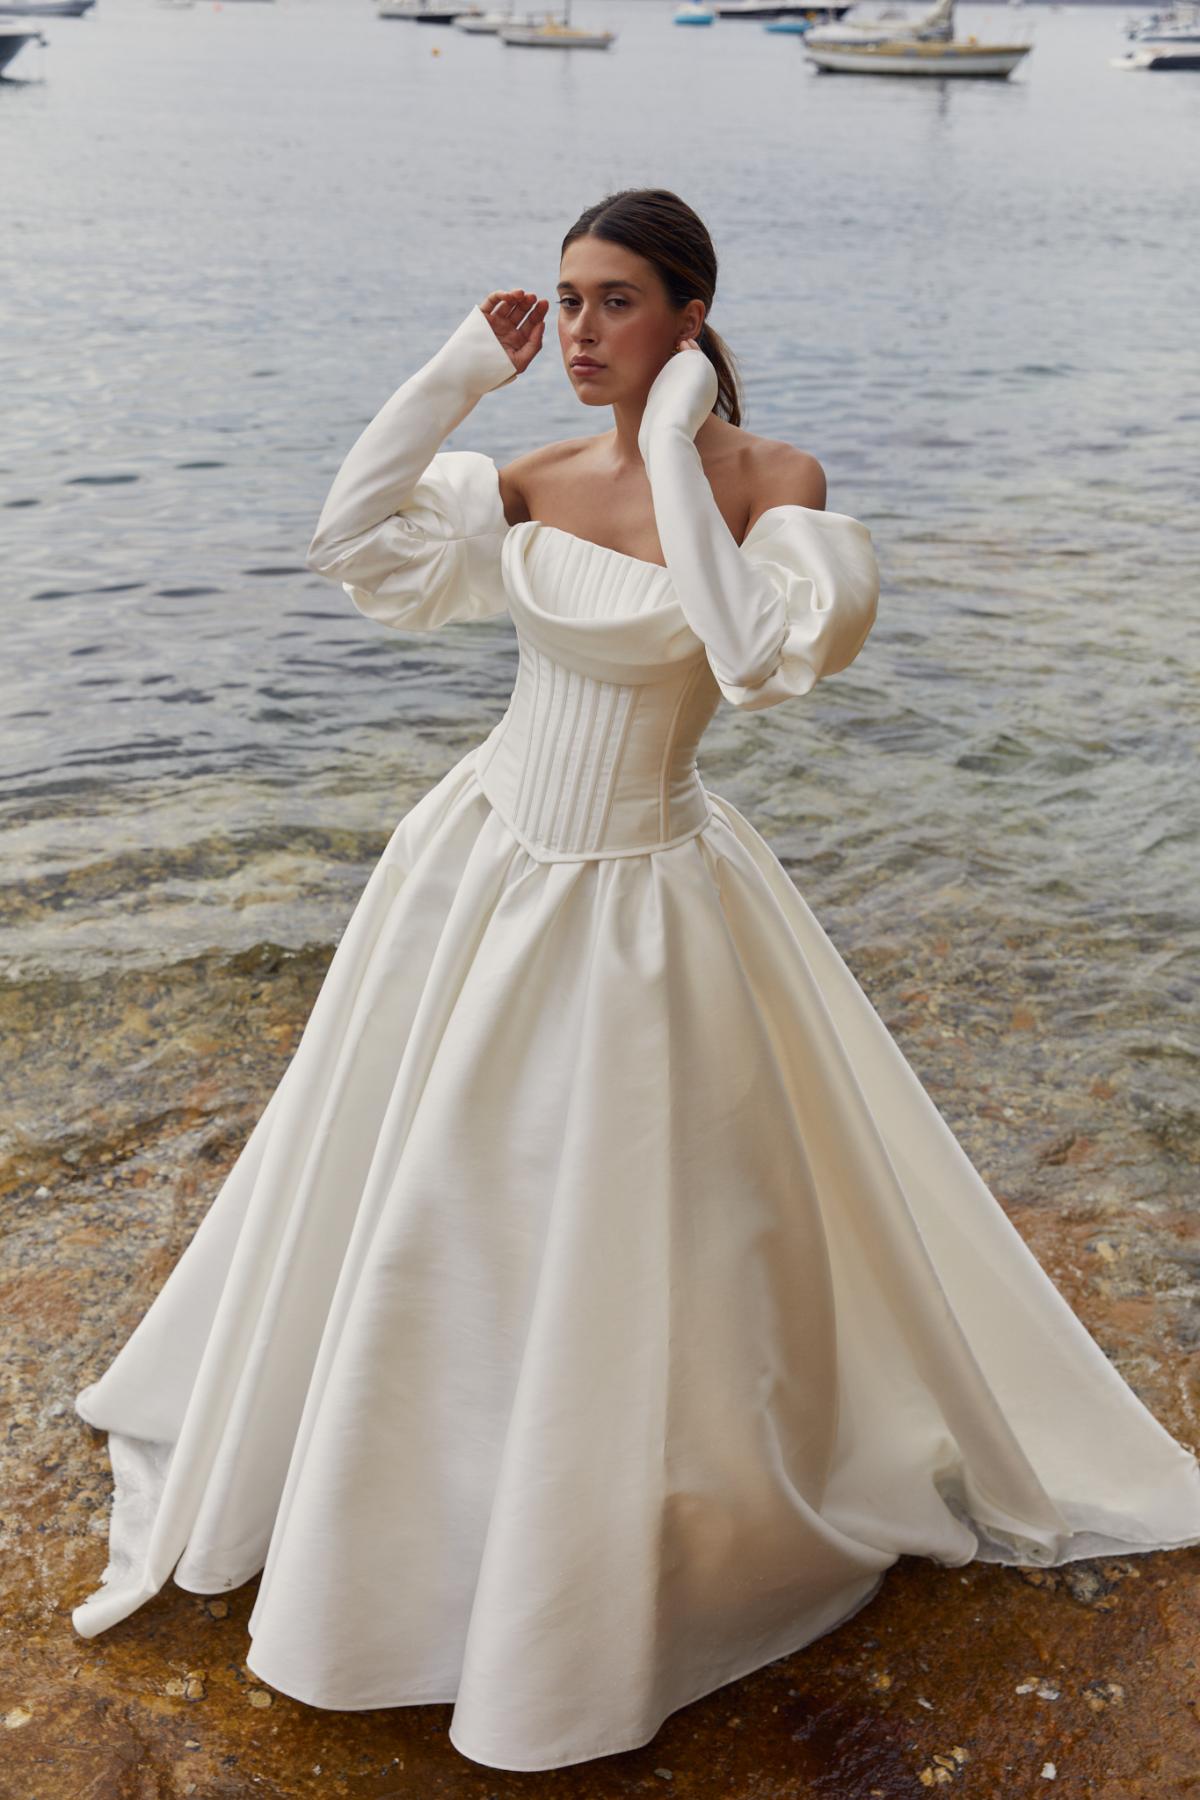 Plus Size Wedding Dress: Bridal Bodysuit With Open Back and Long